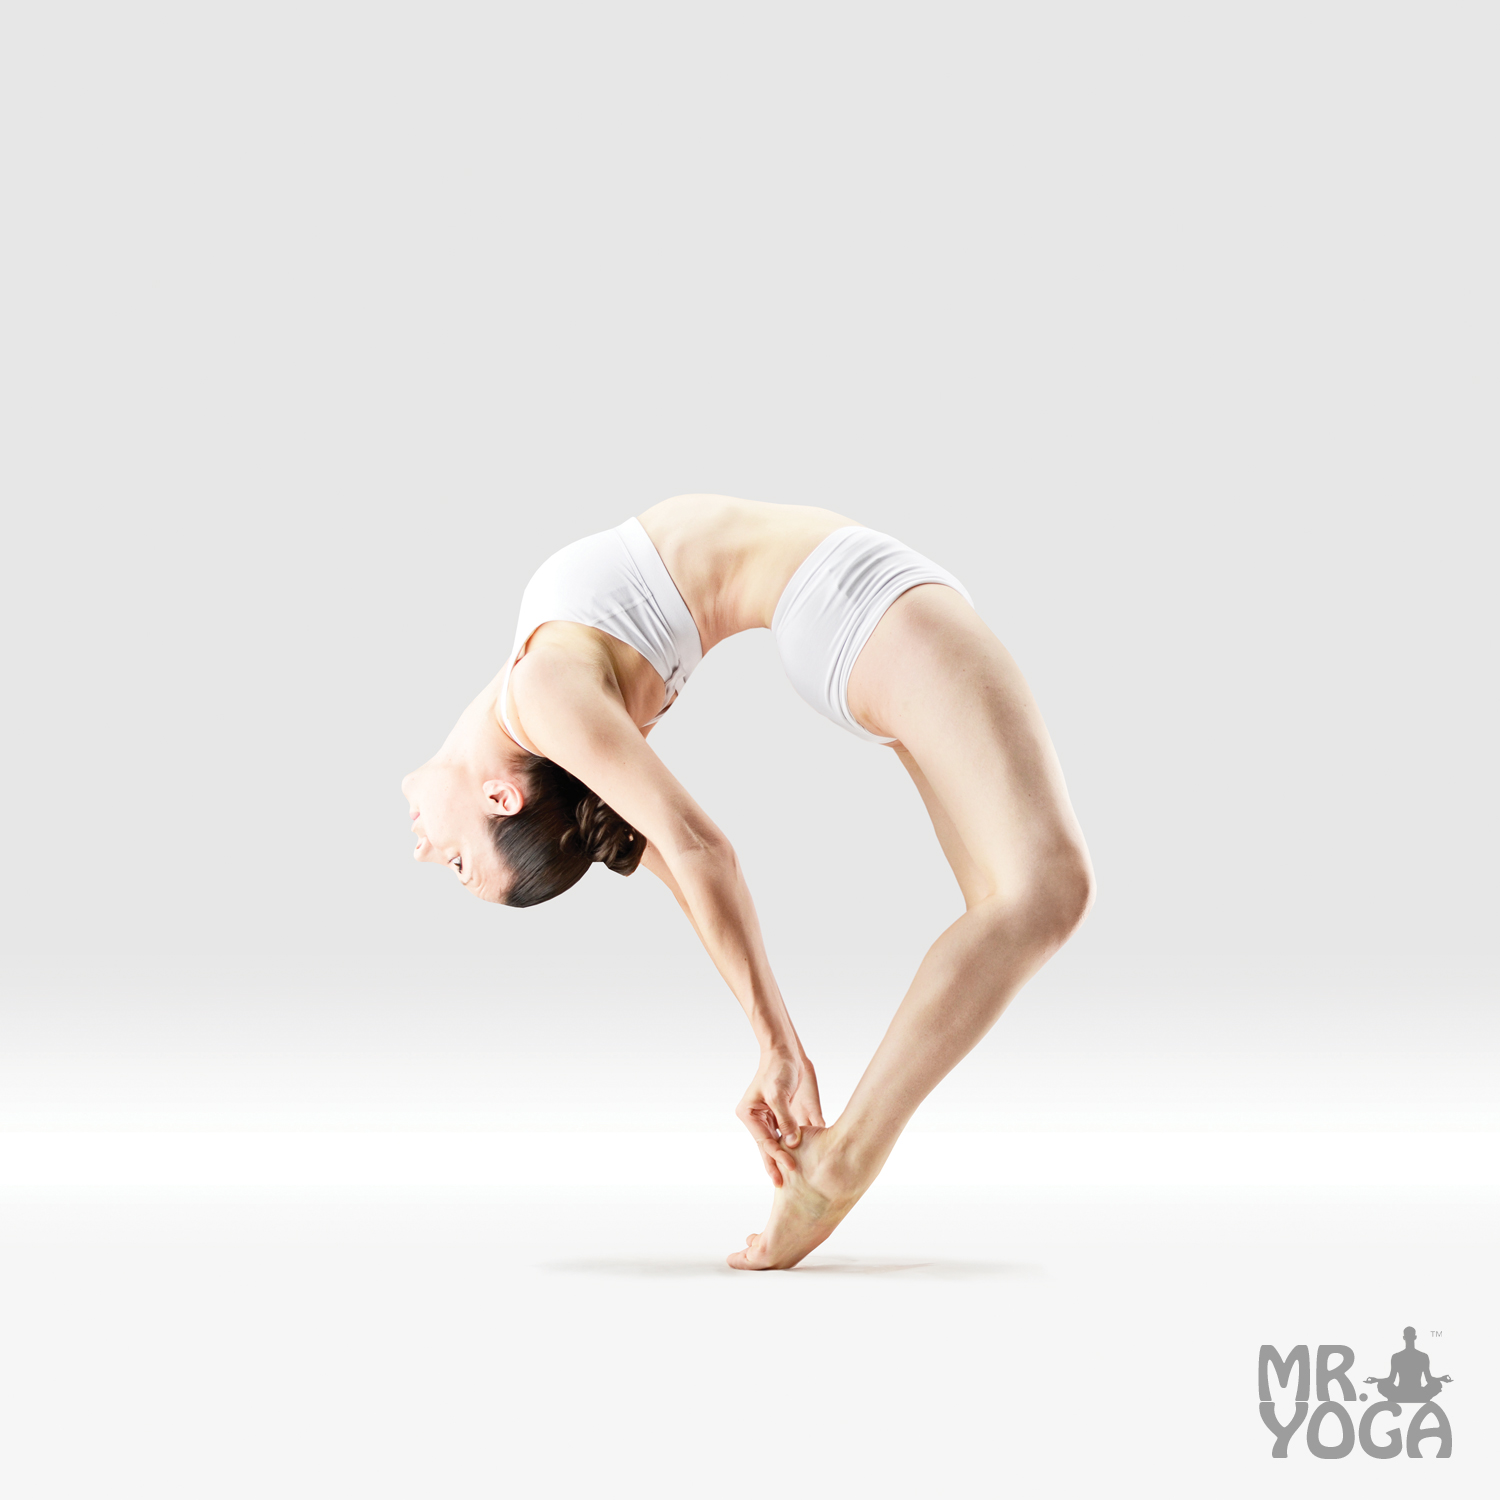 Alternatives for Inverted Poses - Yoga for Times of Change